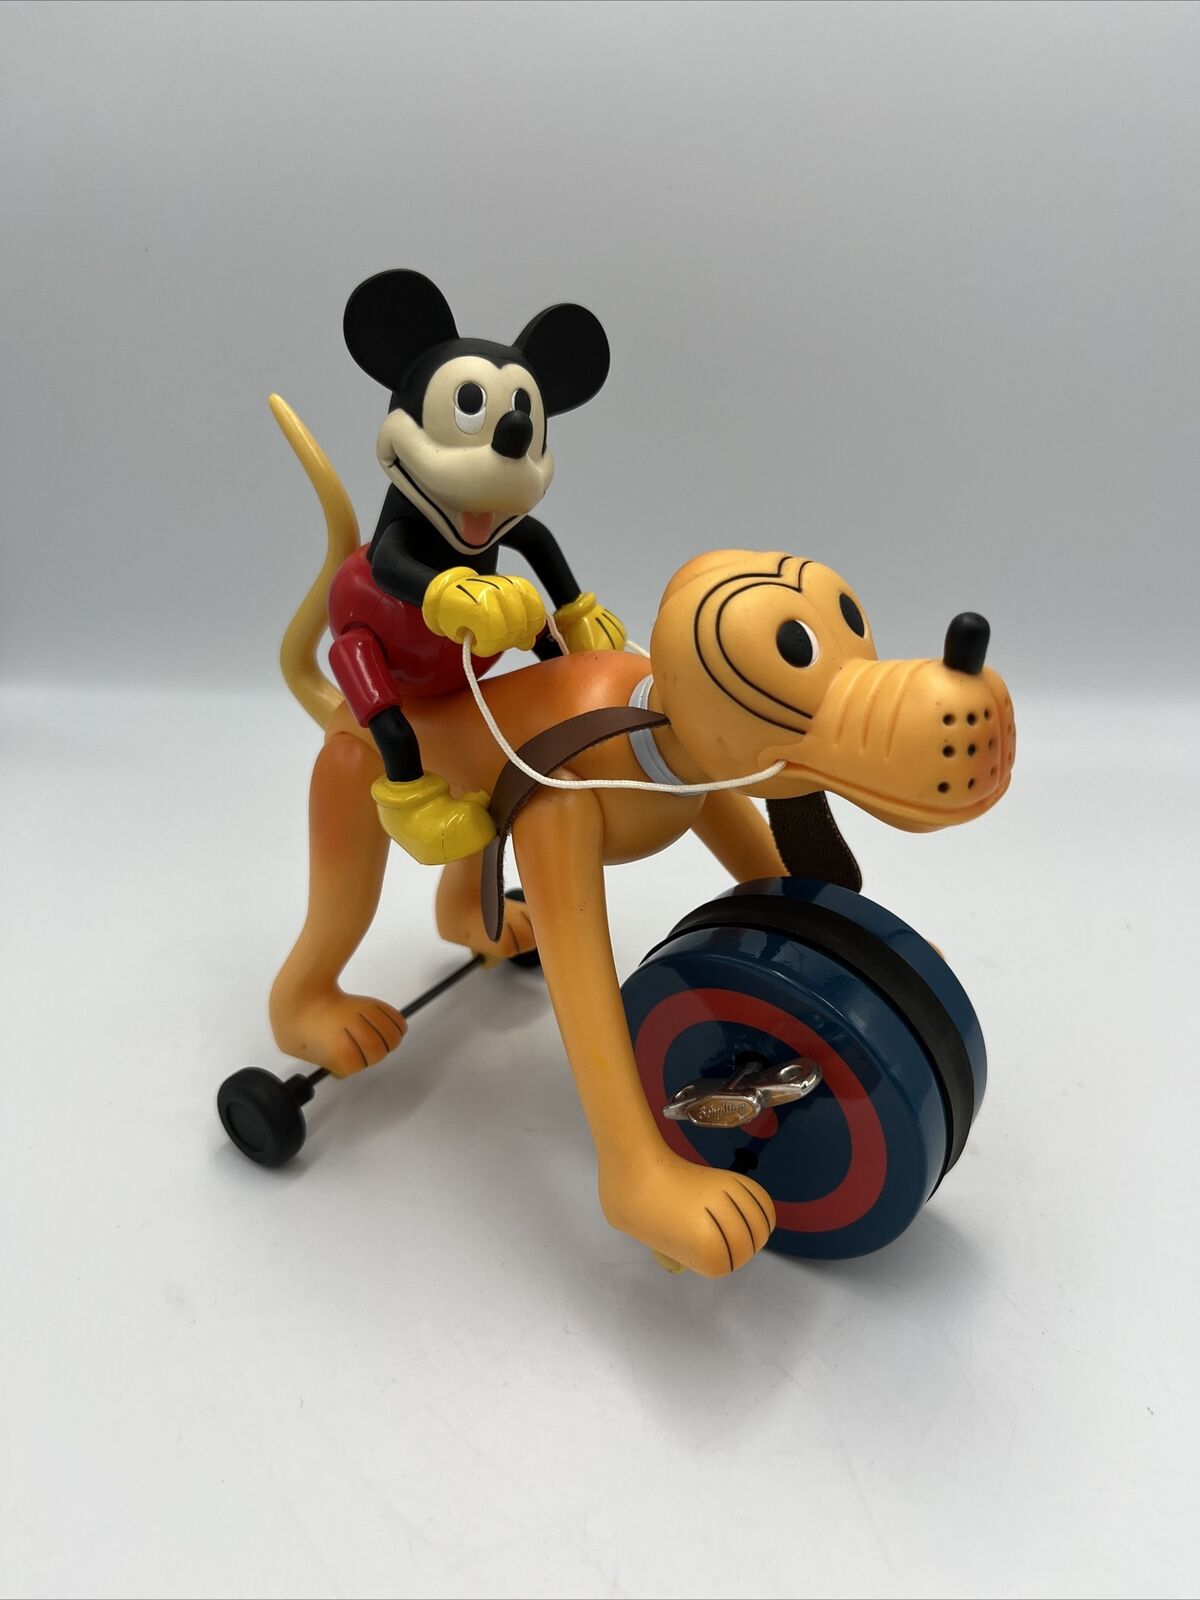 2002 WALT DISNEY SCHYLLING TOYS MICKEY MOUSE RIDING PLUTO WIND UP TOY